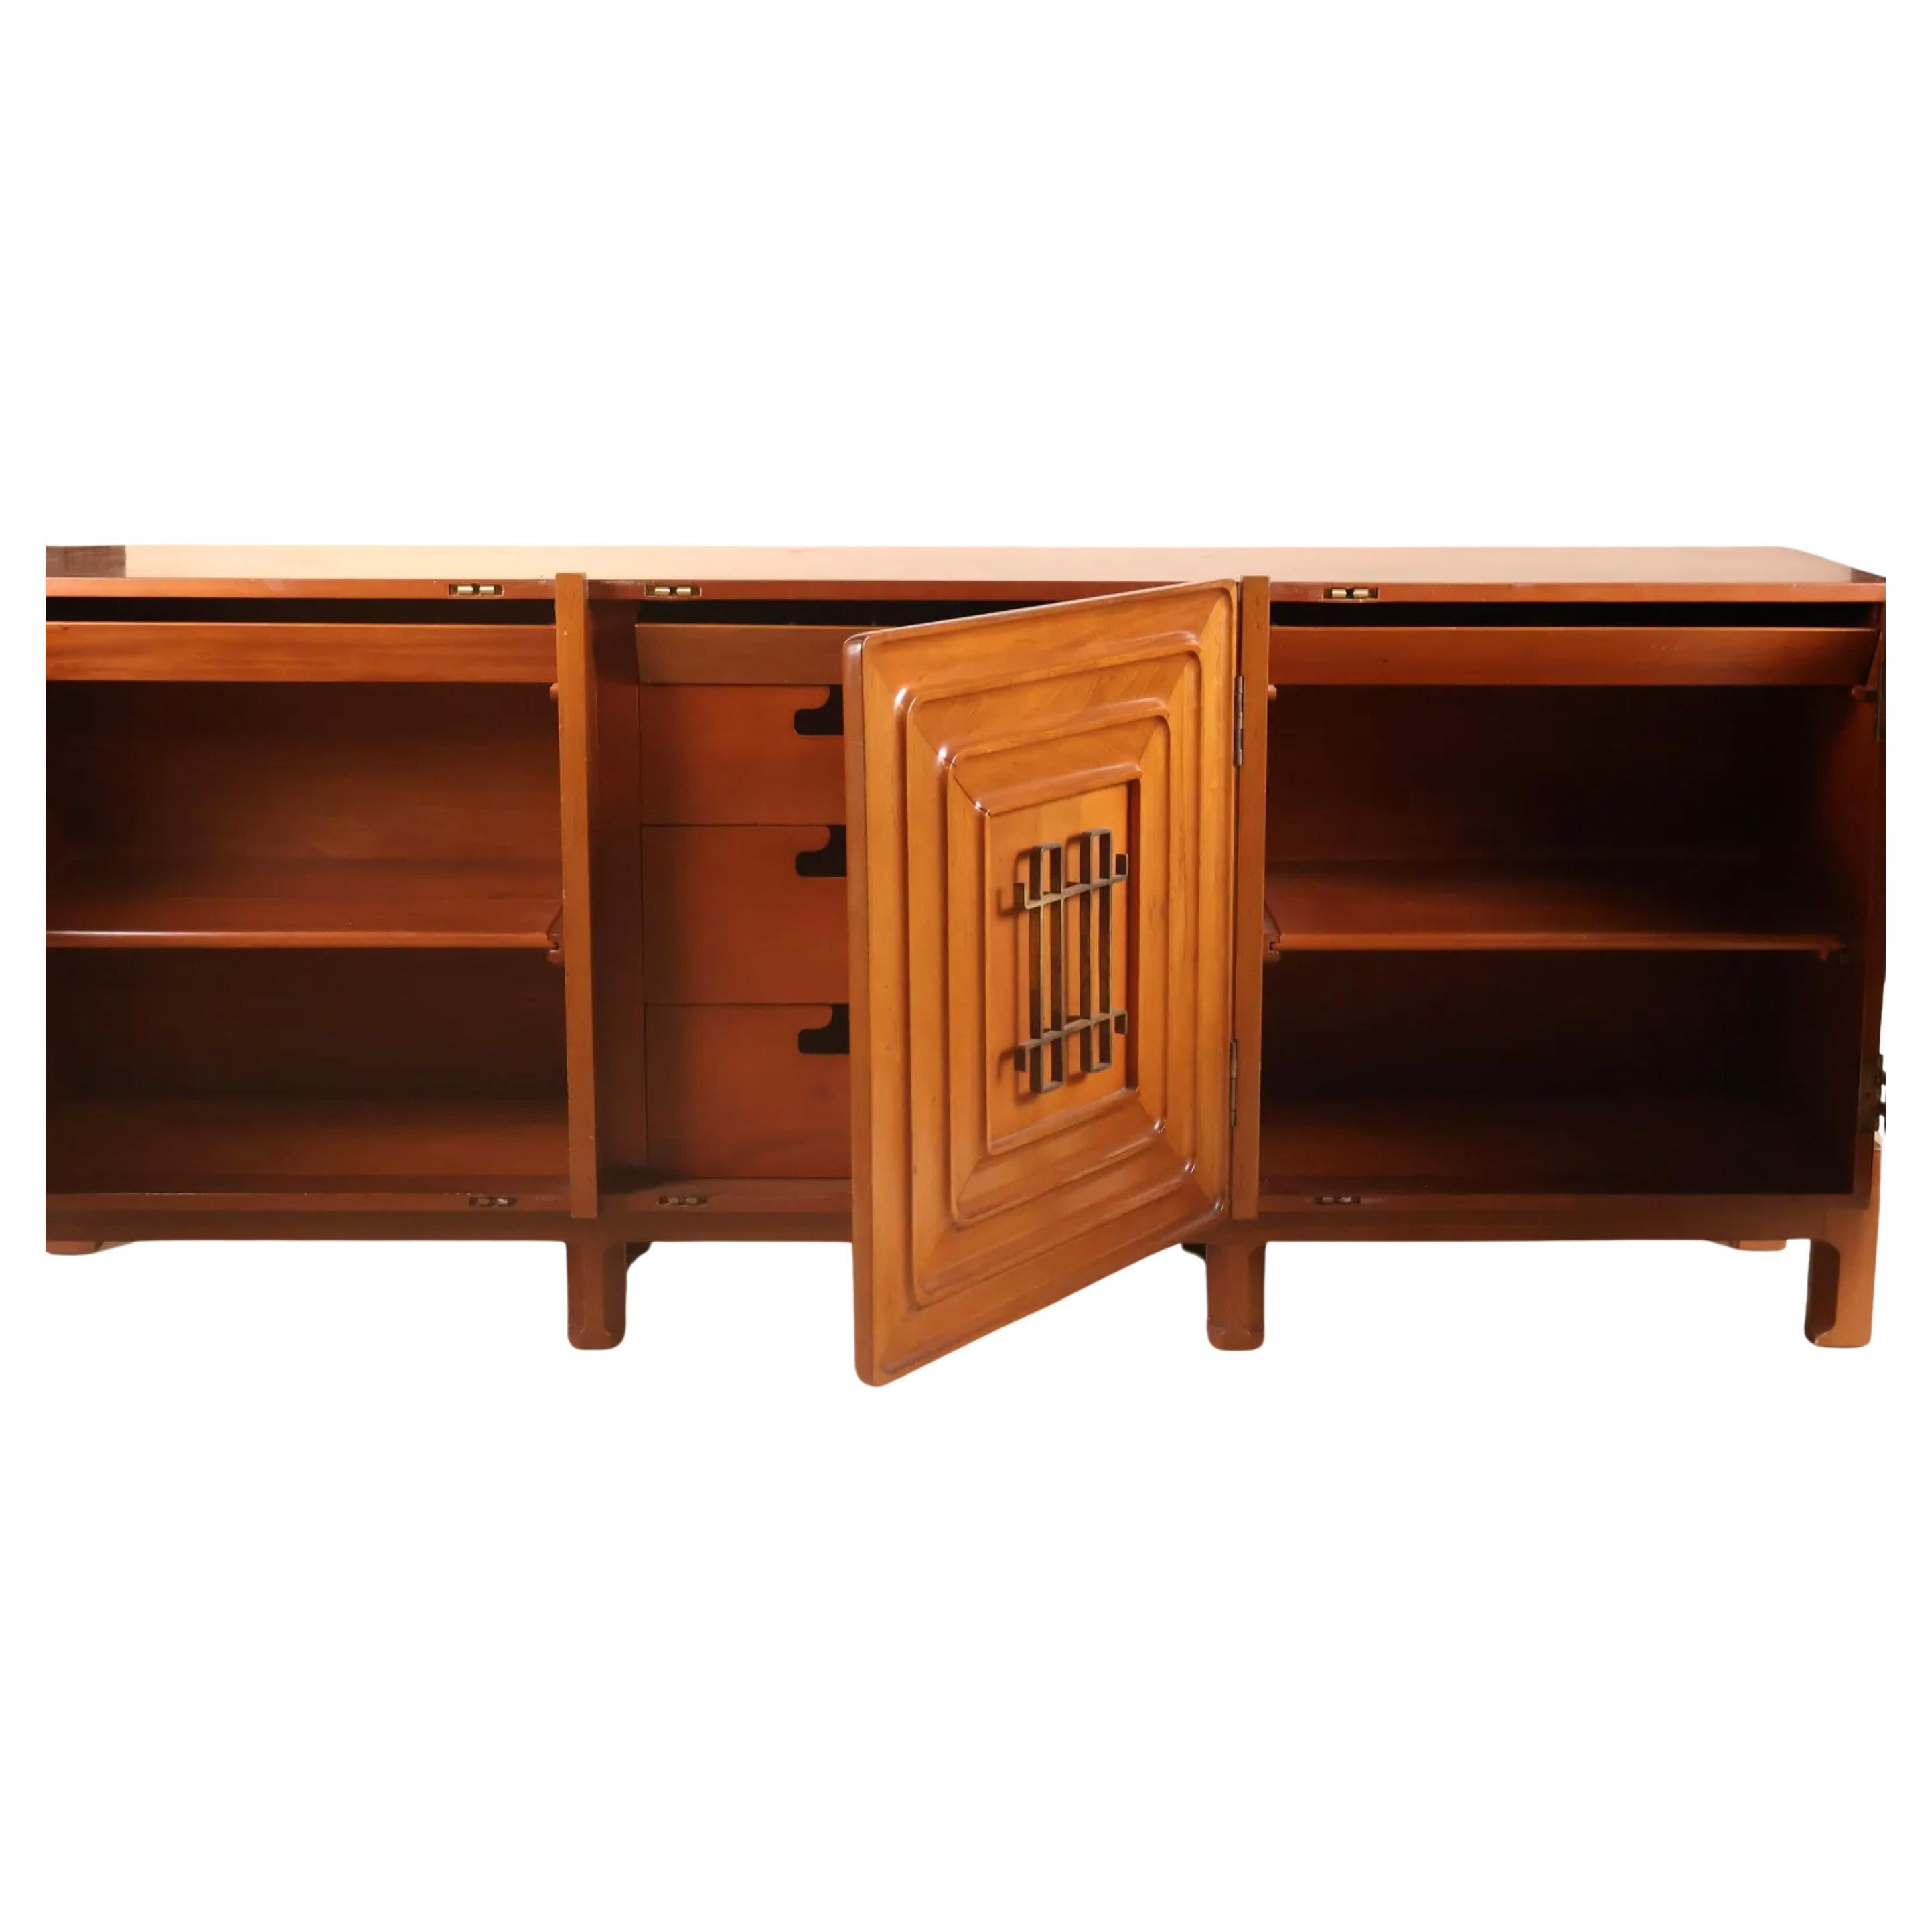 This is an extraordinary credenza cabinet or sideboard designed by Swedish designer Edmond J. Spence. This Beautiful piece showcases Spence's exceptional talent and reflects his unique approach to furniture design. Made for Industria Mueblera in